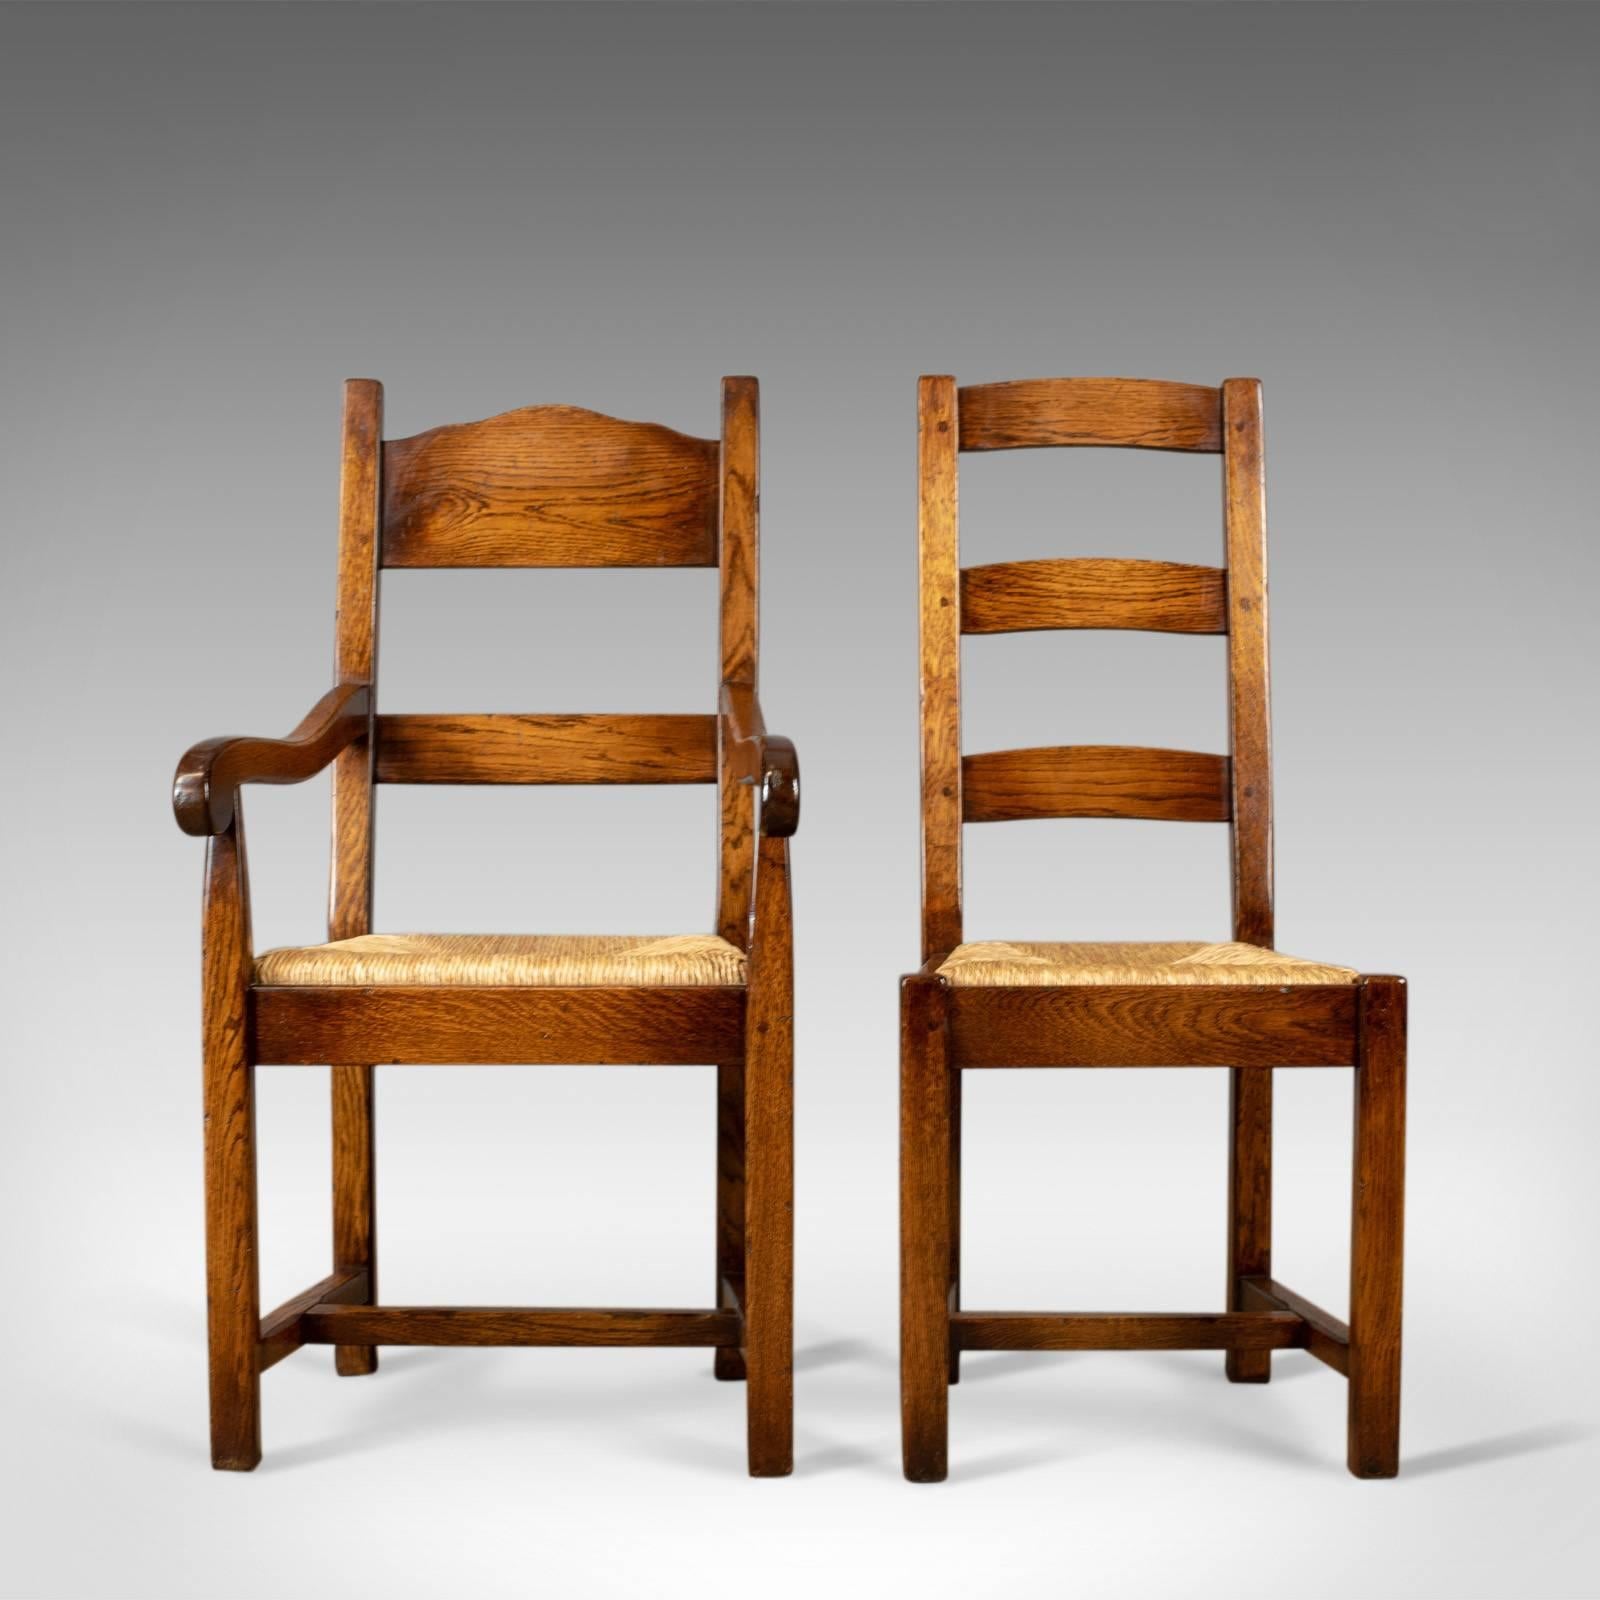 This is a set of eight dining chairs, 20th century English oak in the Victorian taste with rush seats. In a desirable combination benefiting from two carvers and six standard chairs.

Of quality craftsmanship in inch and three-quarter